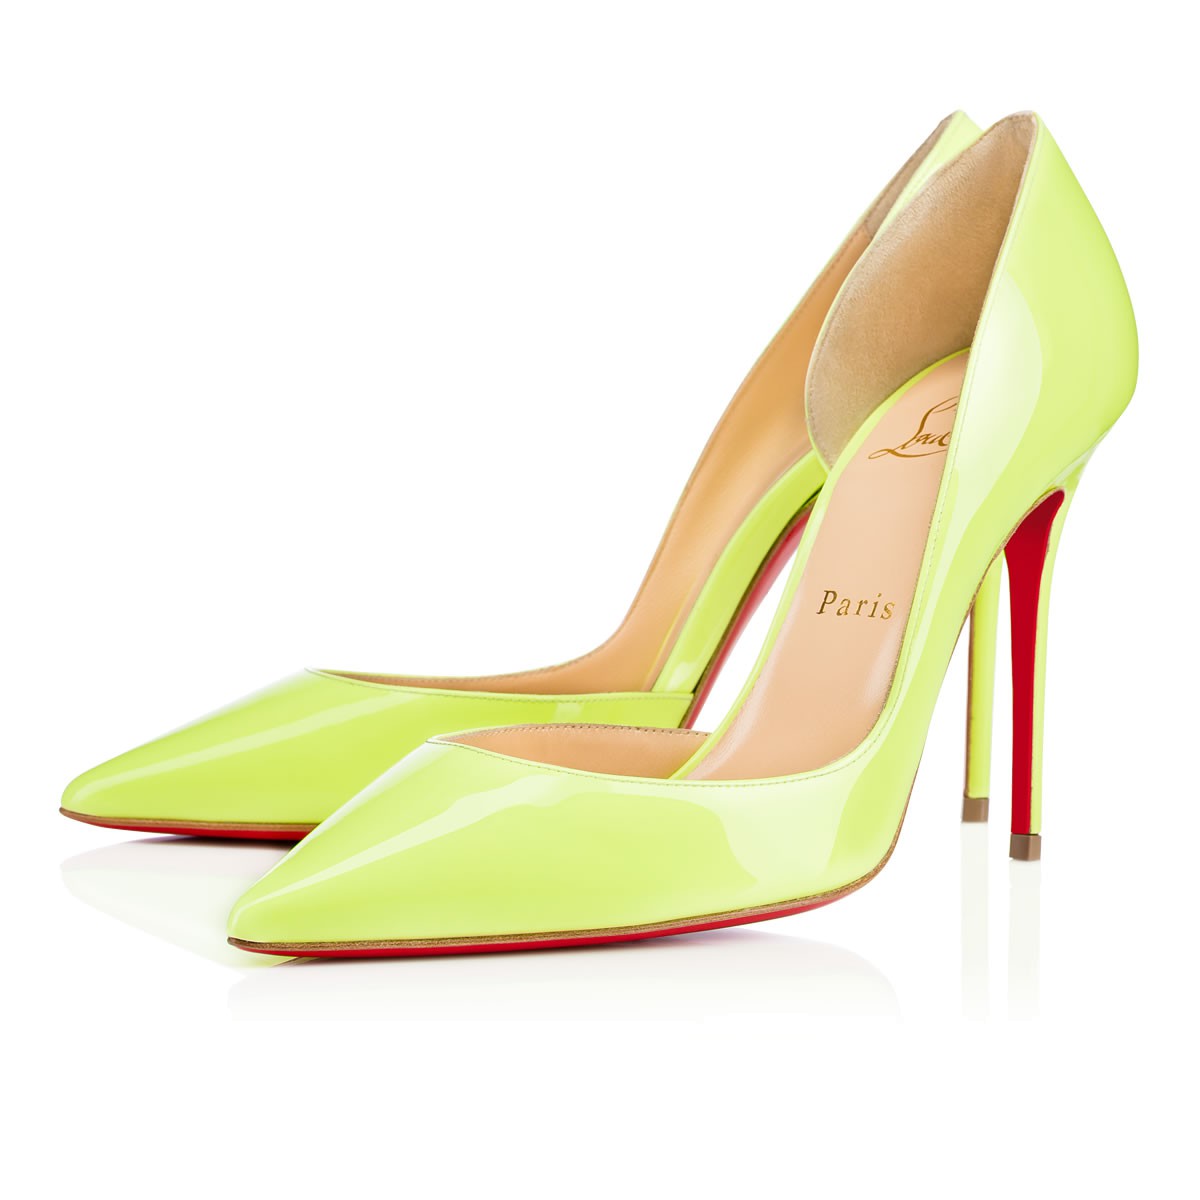 Christian Louboutin Iriza 100 Patent Patent - Spring/summer '16 In Neon ...